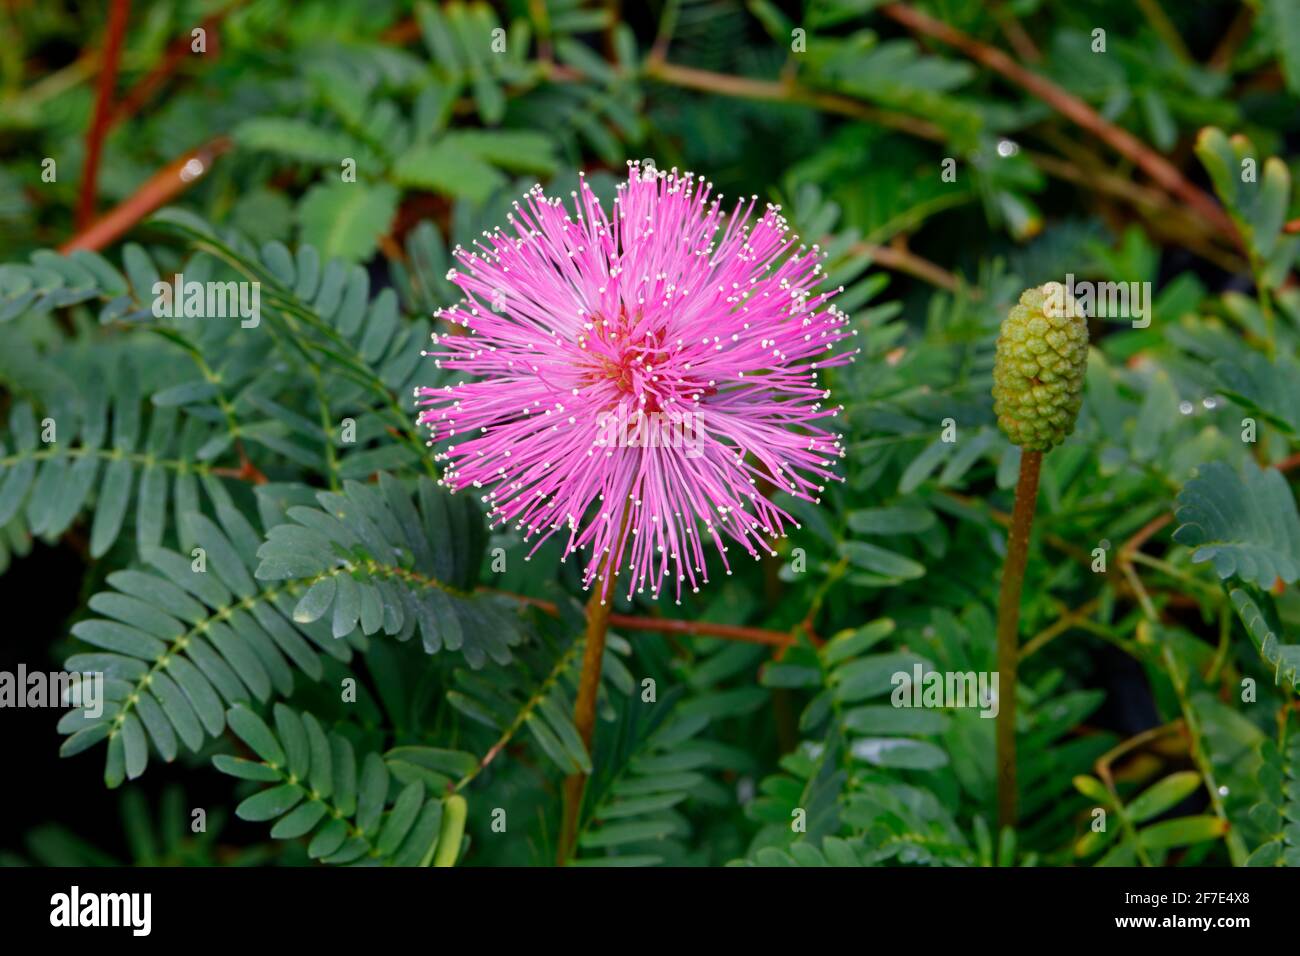 A sensitive plant, Mimosa pudica, in bloom. Stock Photo